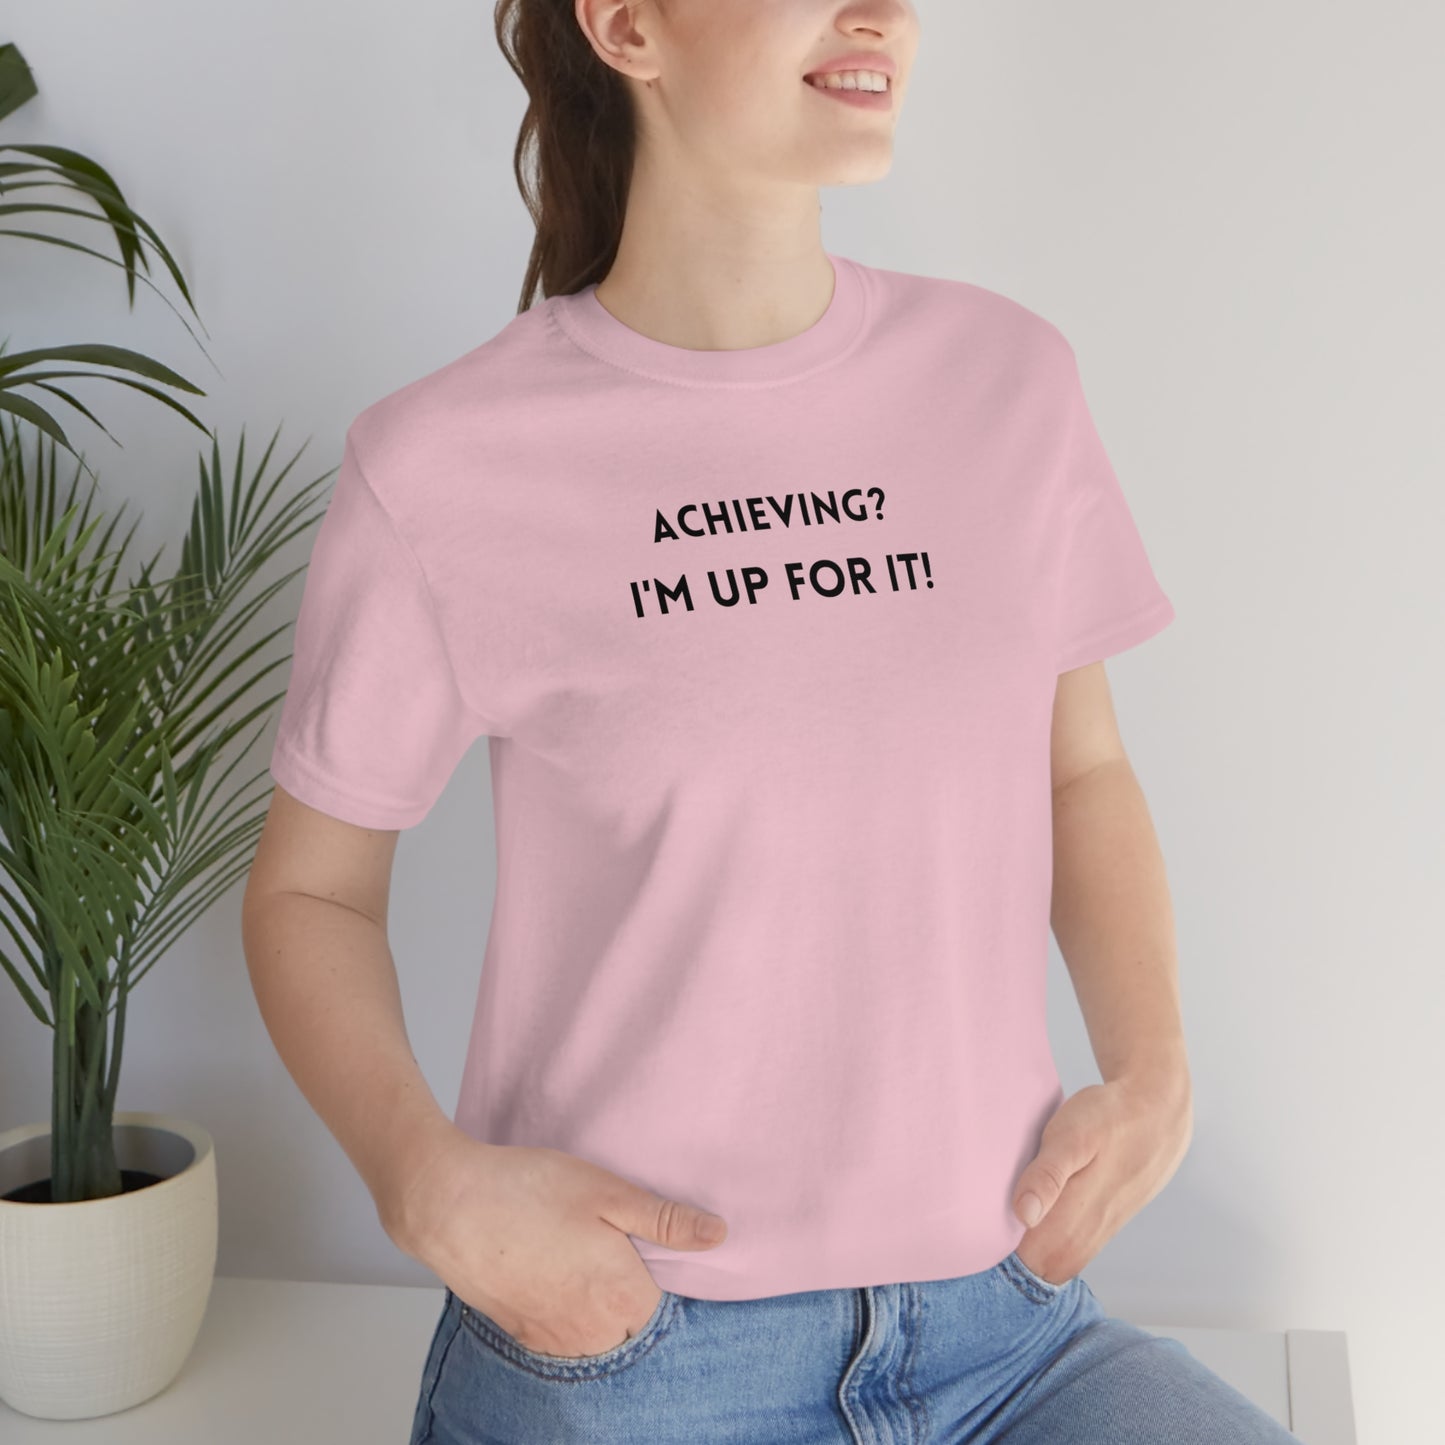 Achieving? I am up for it! t shirt tee shirt with inspirational words t shirt gift for students self affirming words t shirt